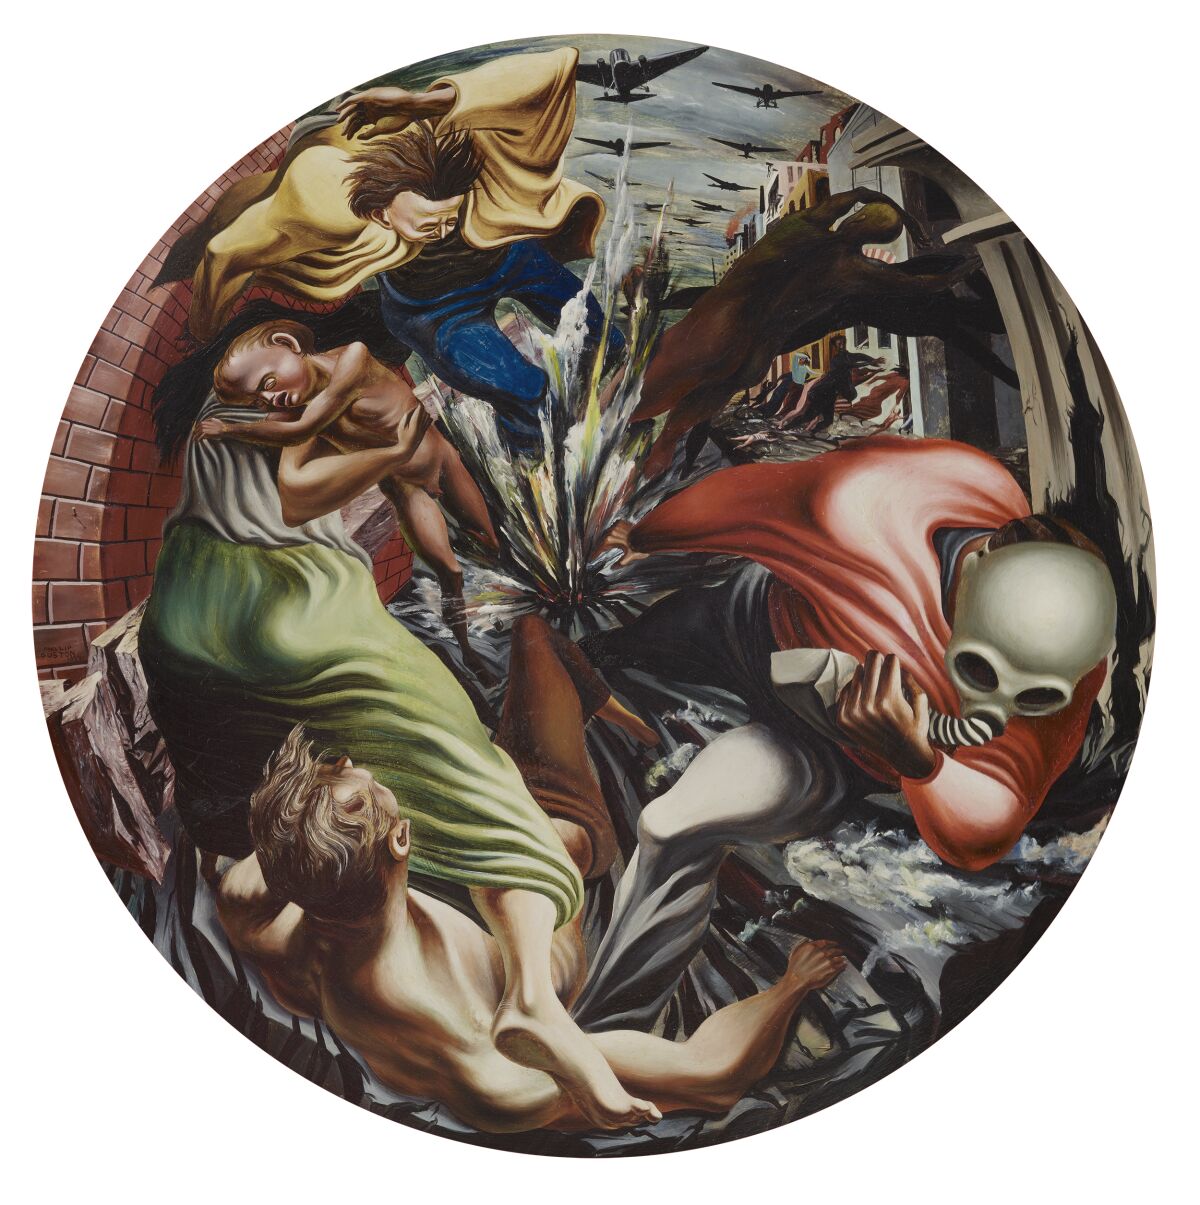 A circular canvas shows roiling human figures fleeing in a city street amid bomb explosions.